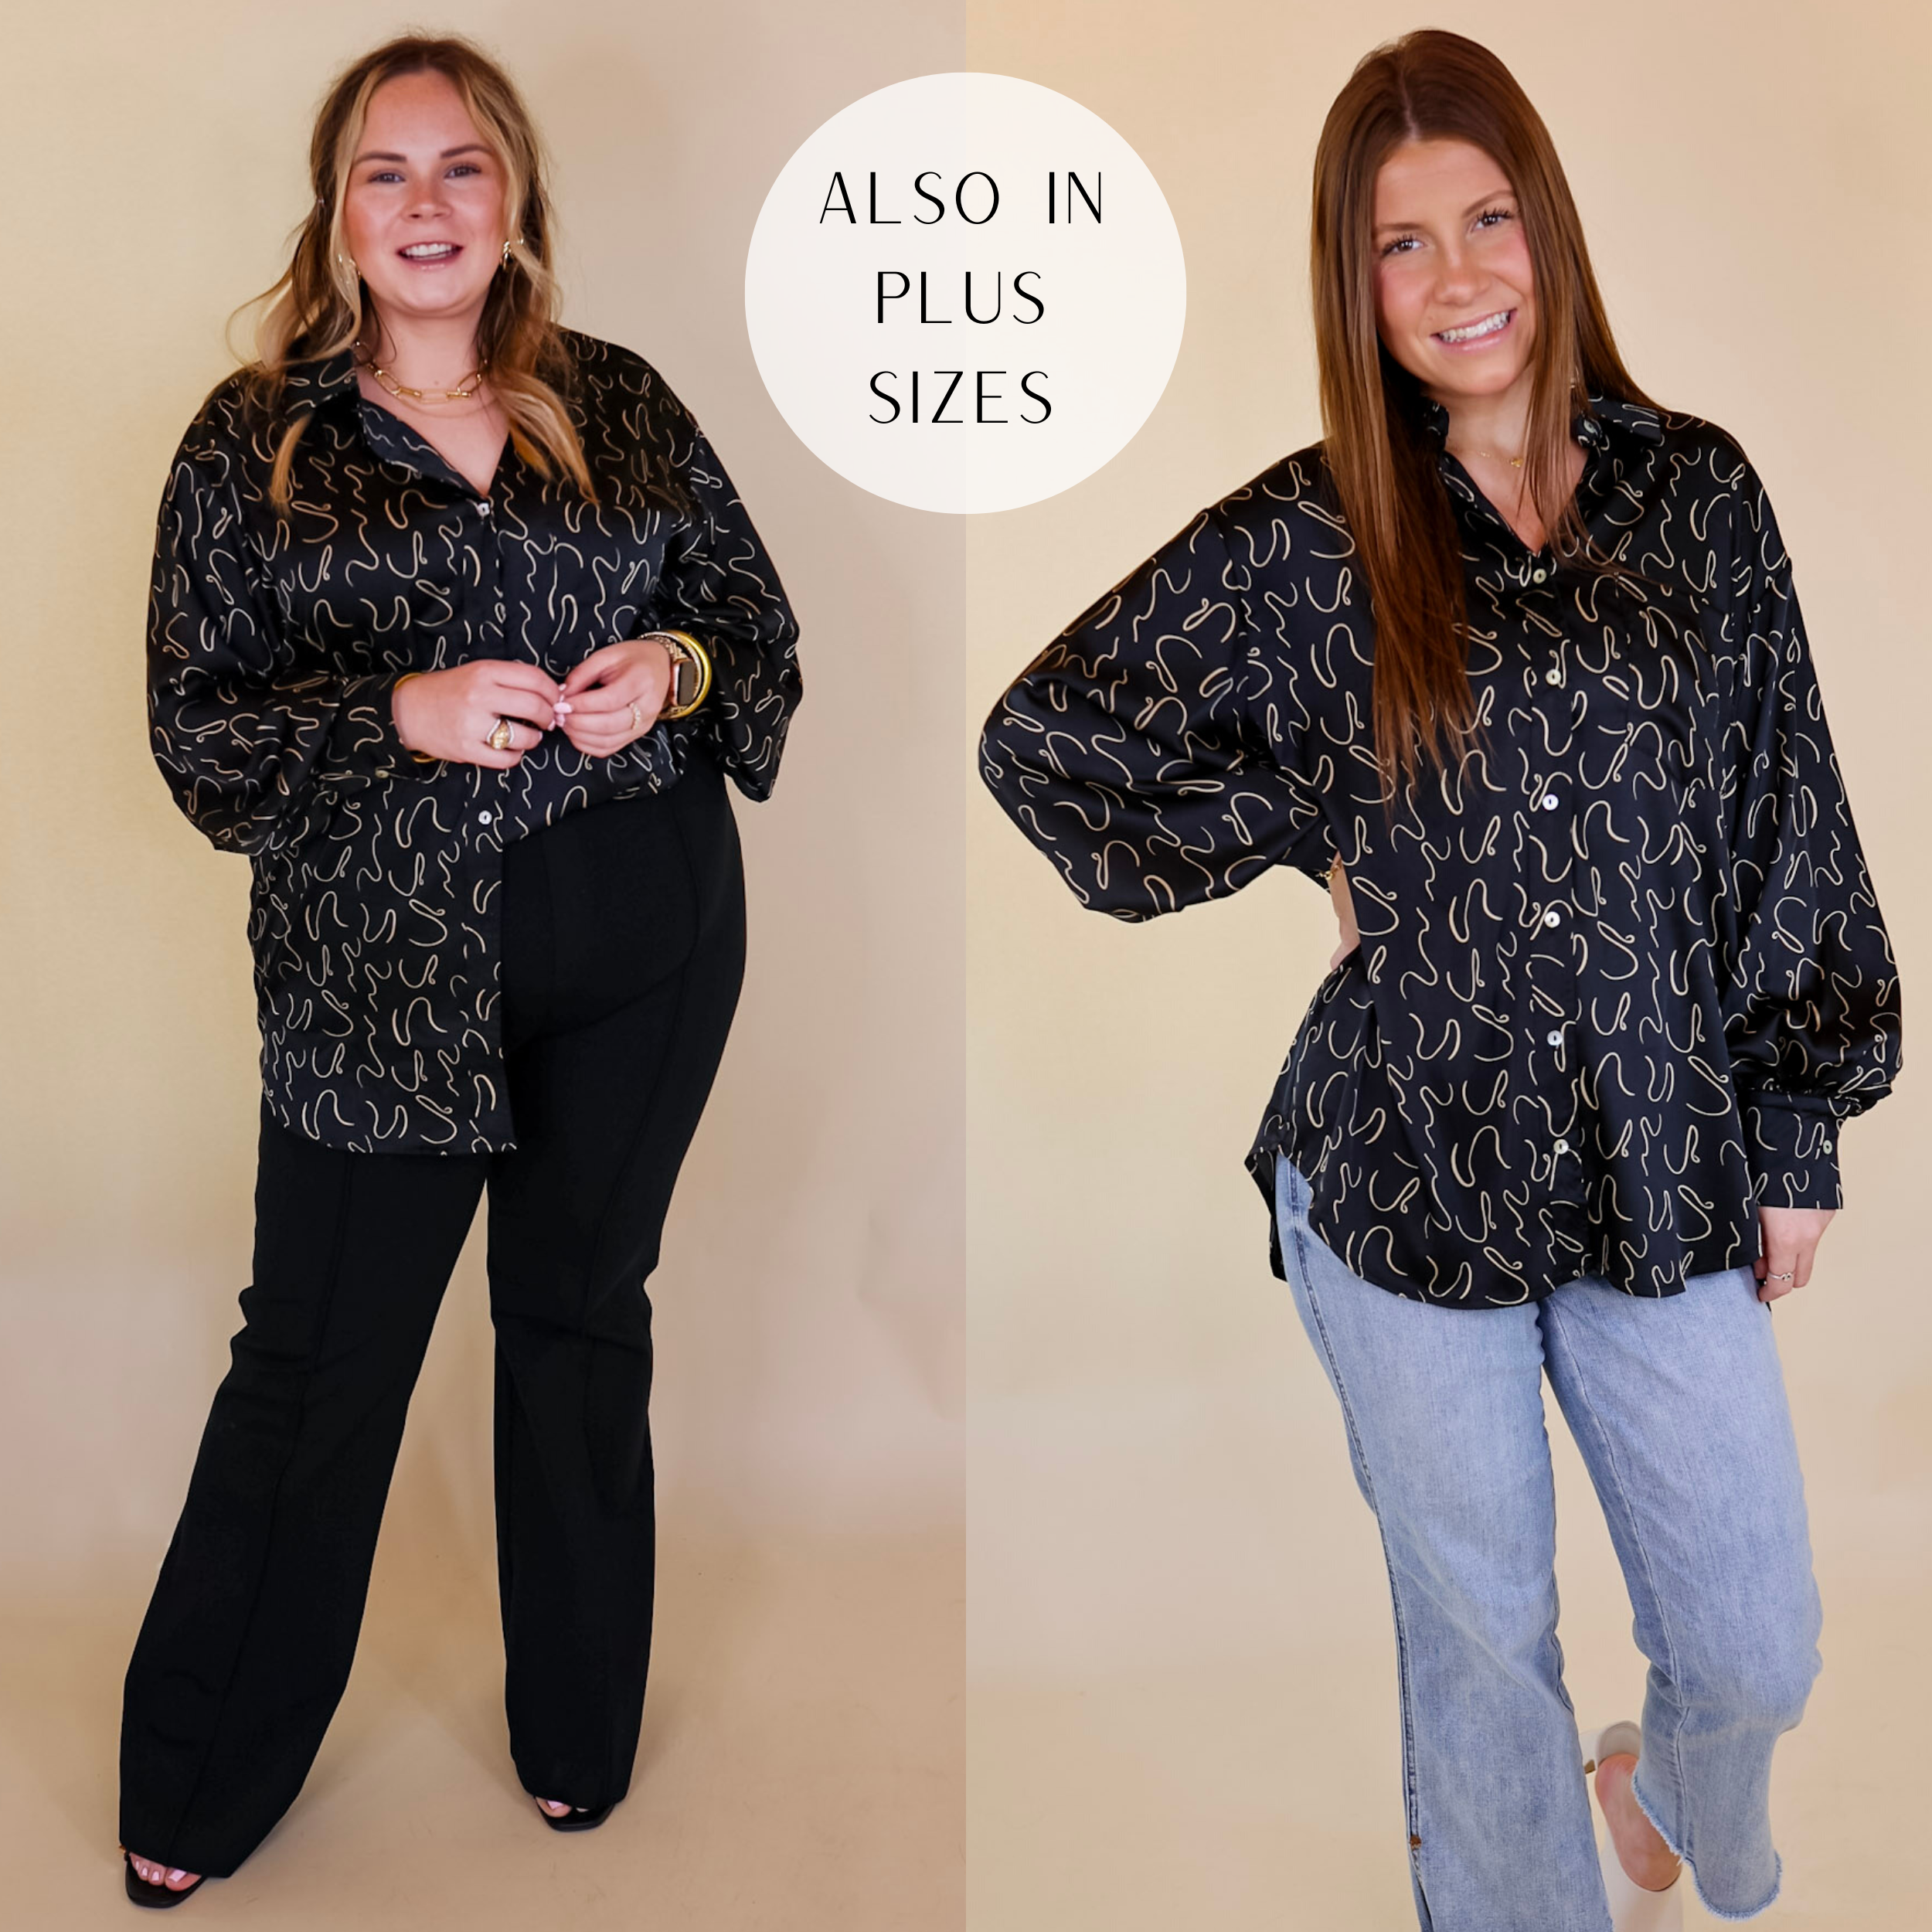 Models are wearing a satin button up top with long sleeves, a collared neckline, and a gold tone swirl print. Size large model has it paired with black slacks, black heels, and gold jewelry. Size small model has it paired with cropped jeans, ivory heels, and gold jewelry.